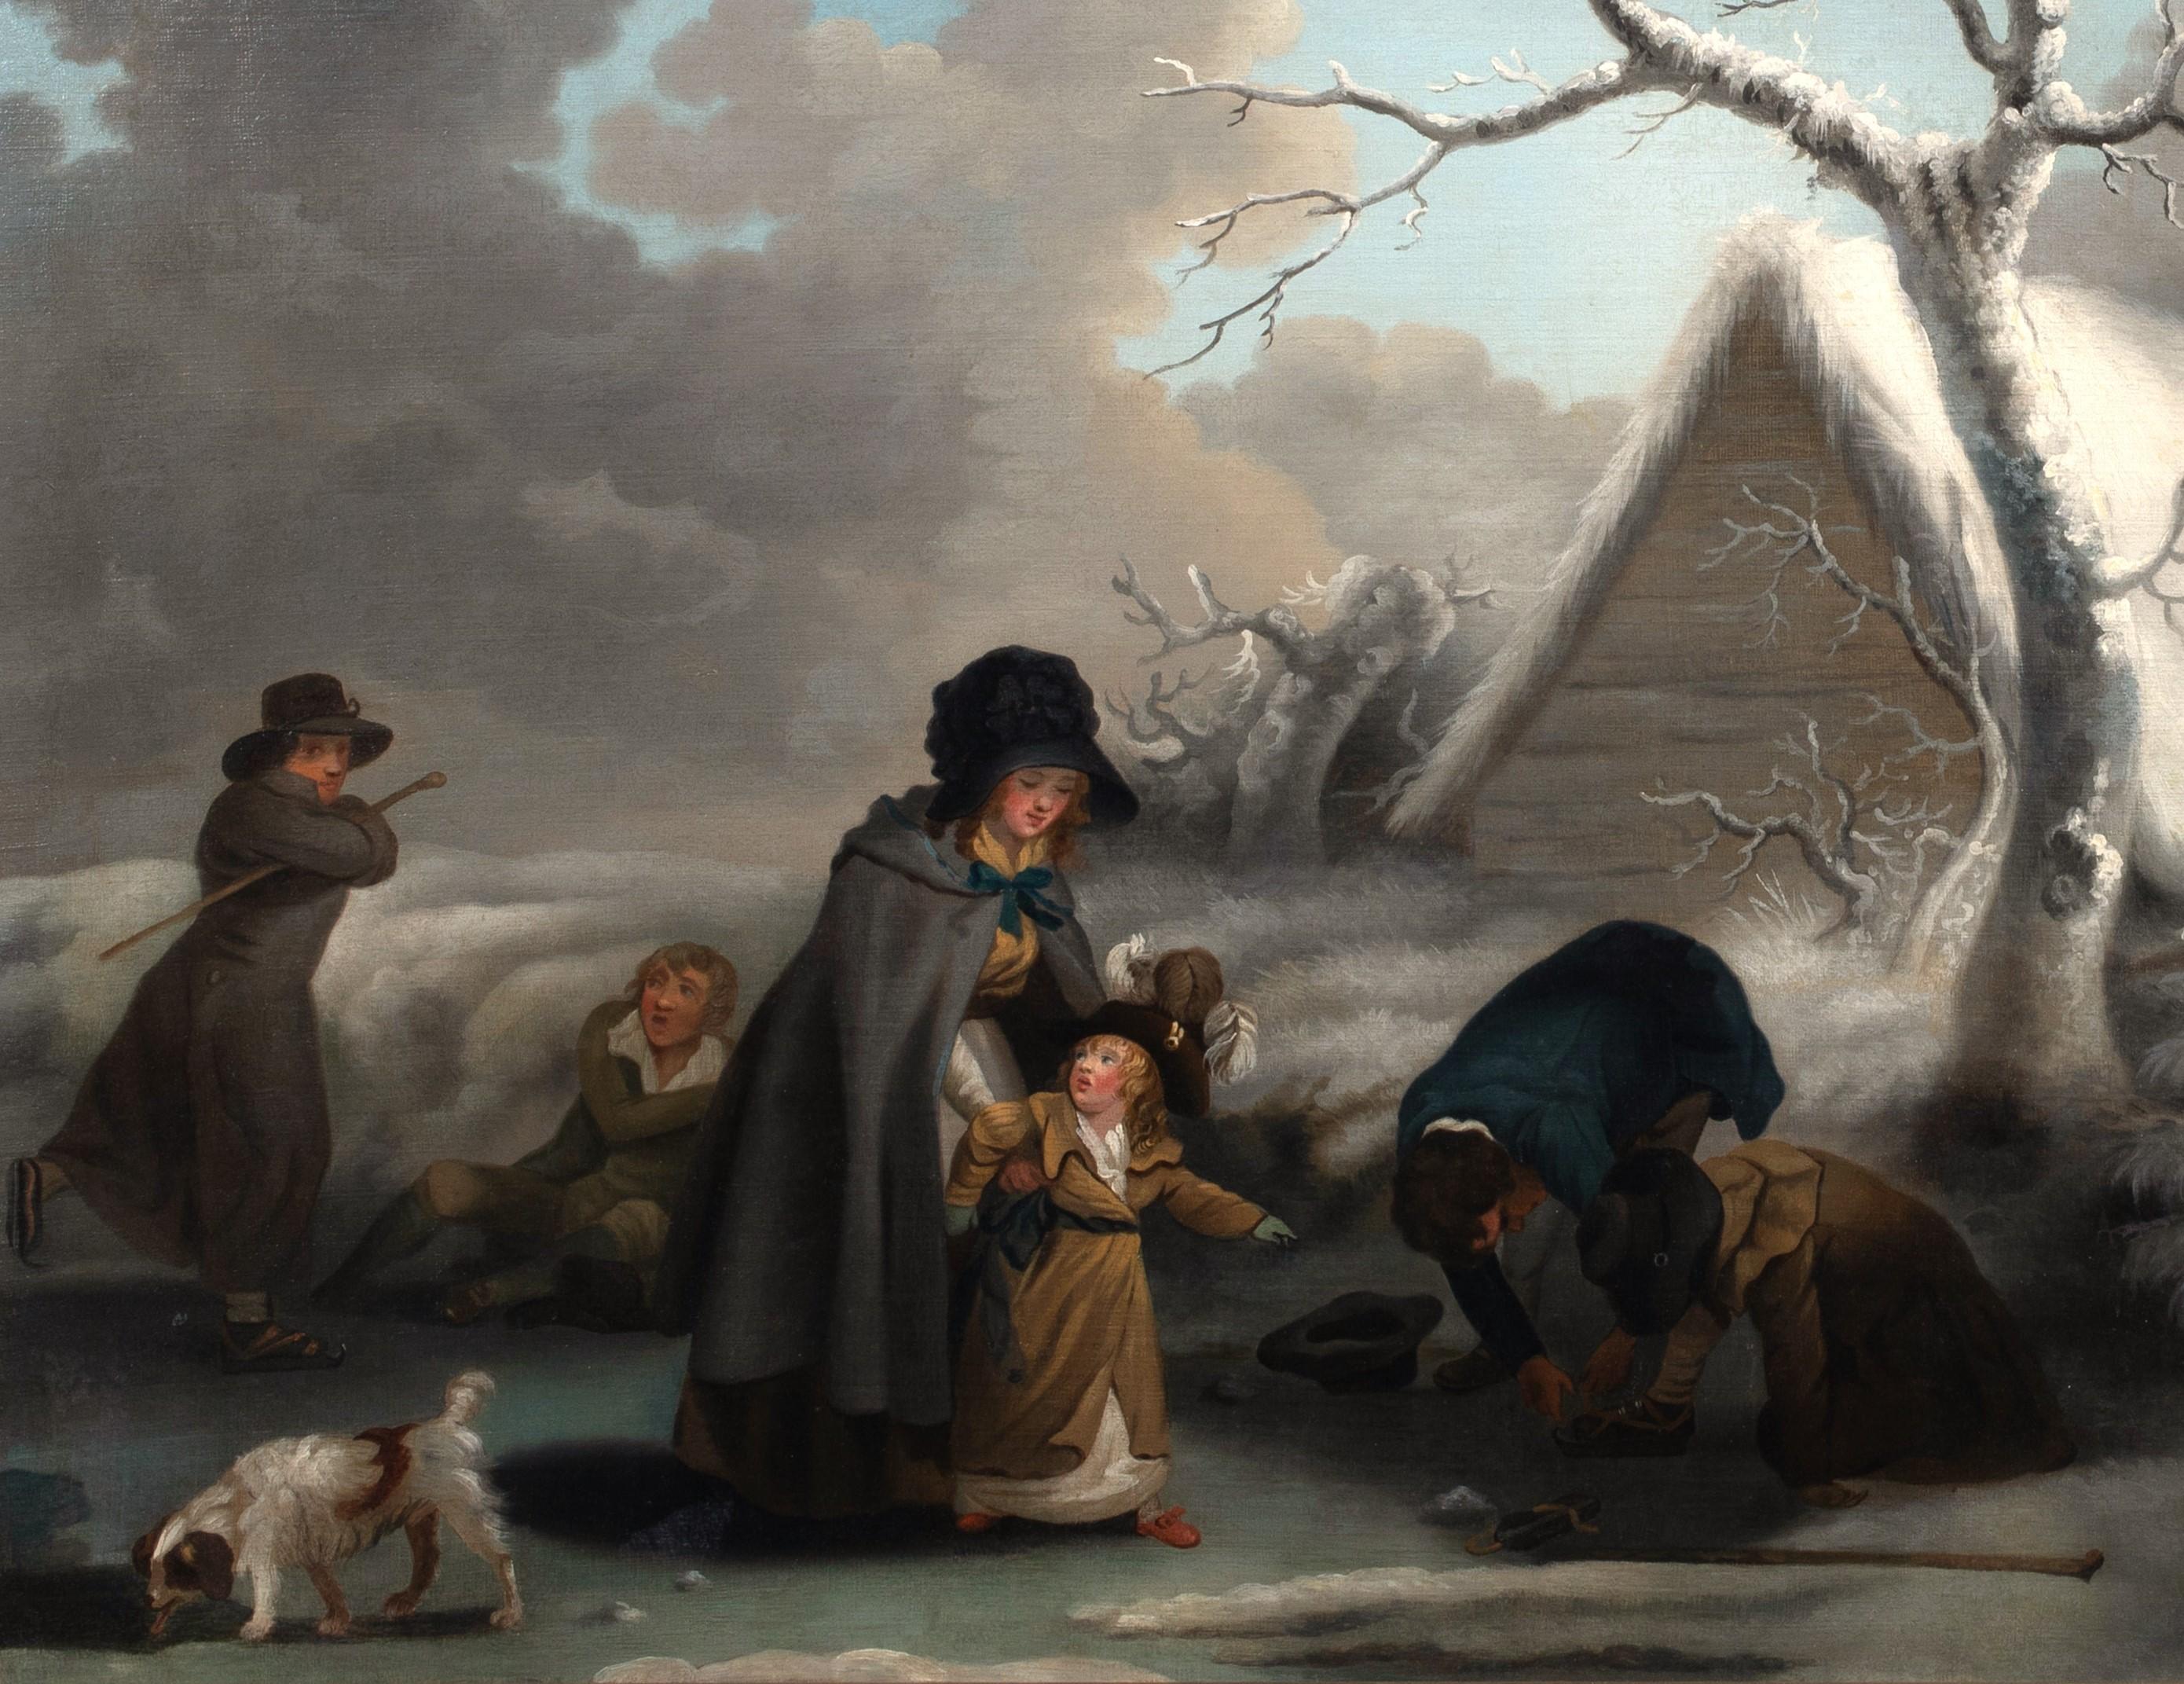 Ice Skating In A Winter Landscape, 18th Century   1